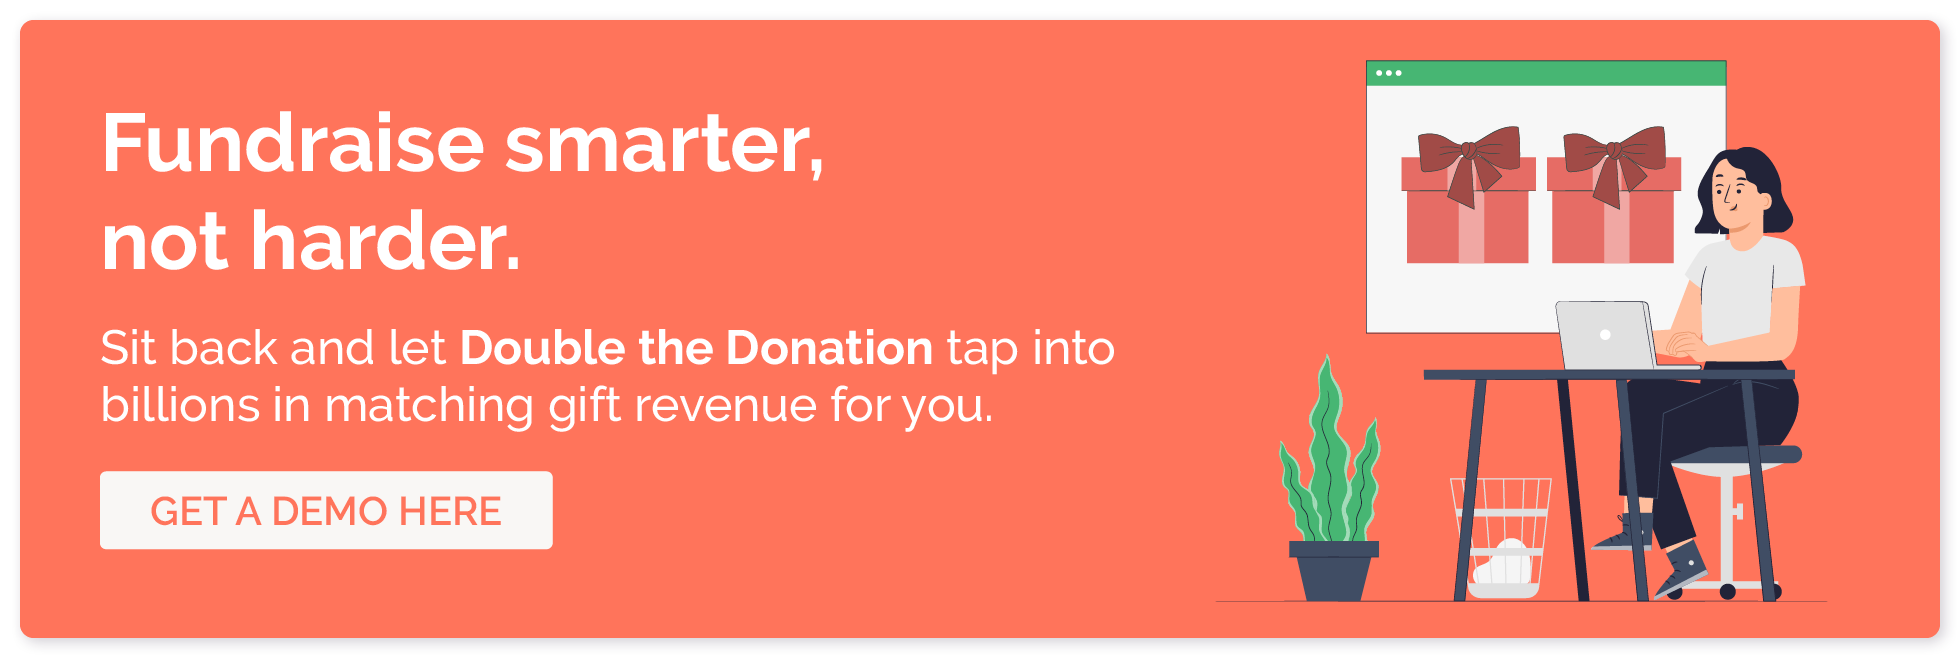 Get a demo of Double the Donation’s software, which can help your nonprofit raise matching gifts to build its nonprofit operating reserves.